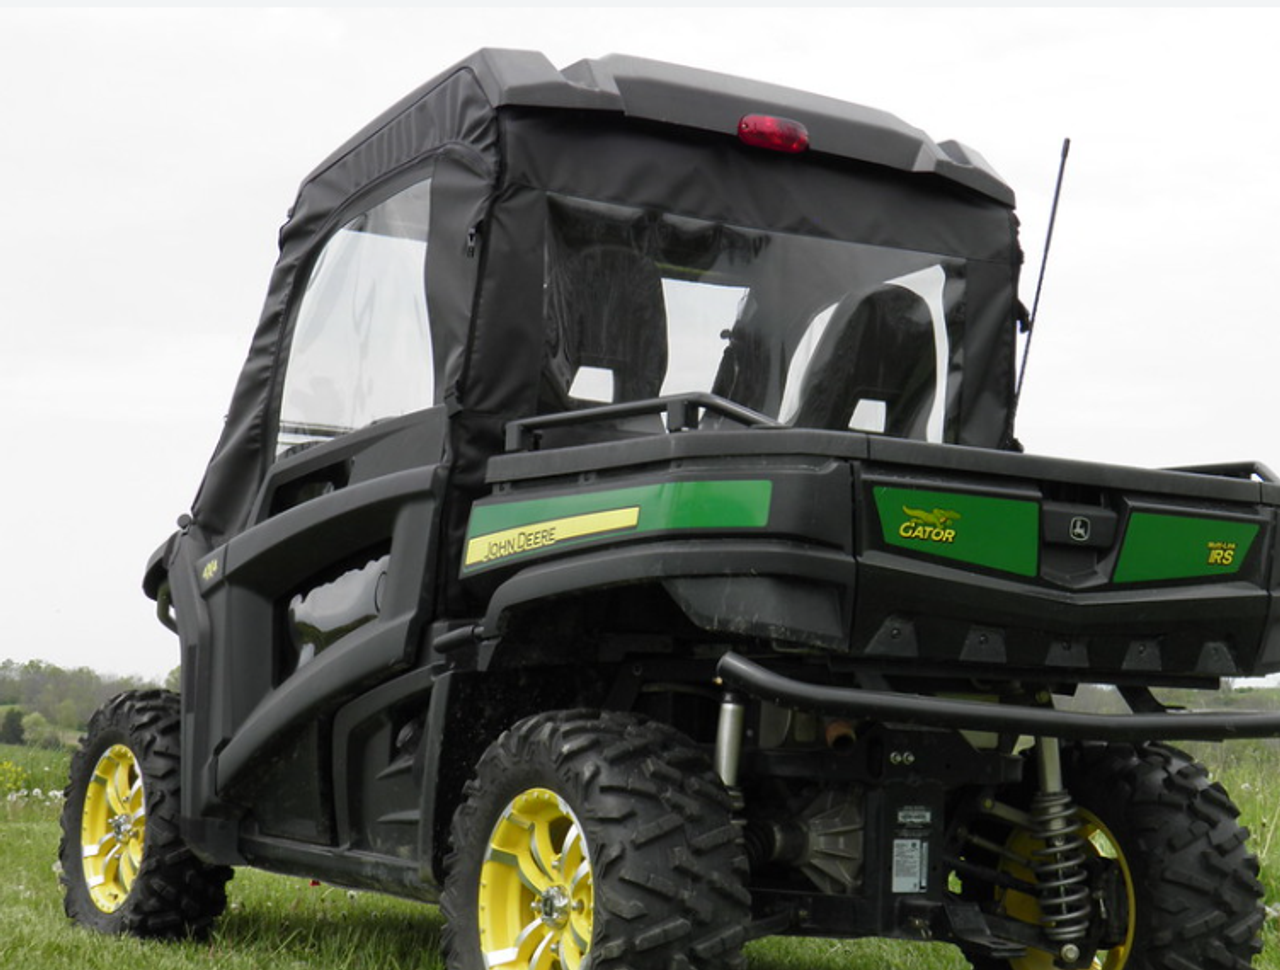 John Deere Gator RSX 850/860 Full Cab Enclosure for Hard Windshield rear and side angle view